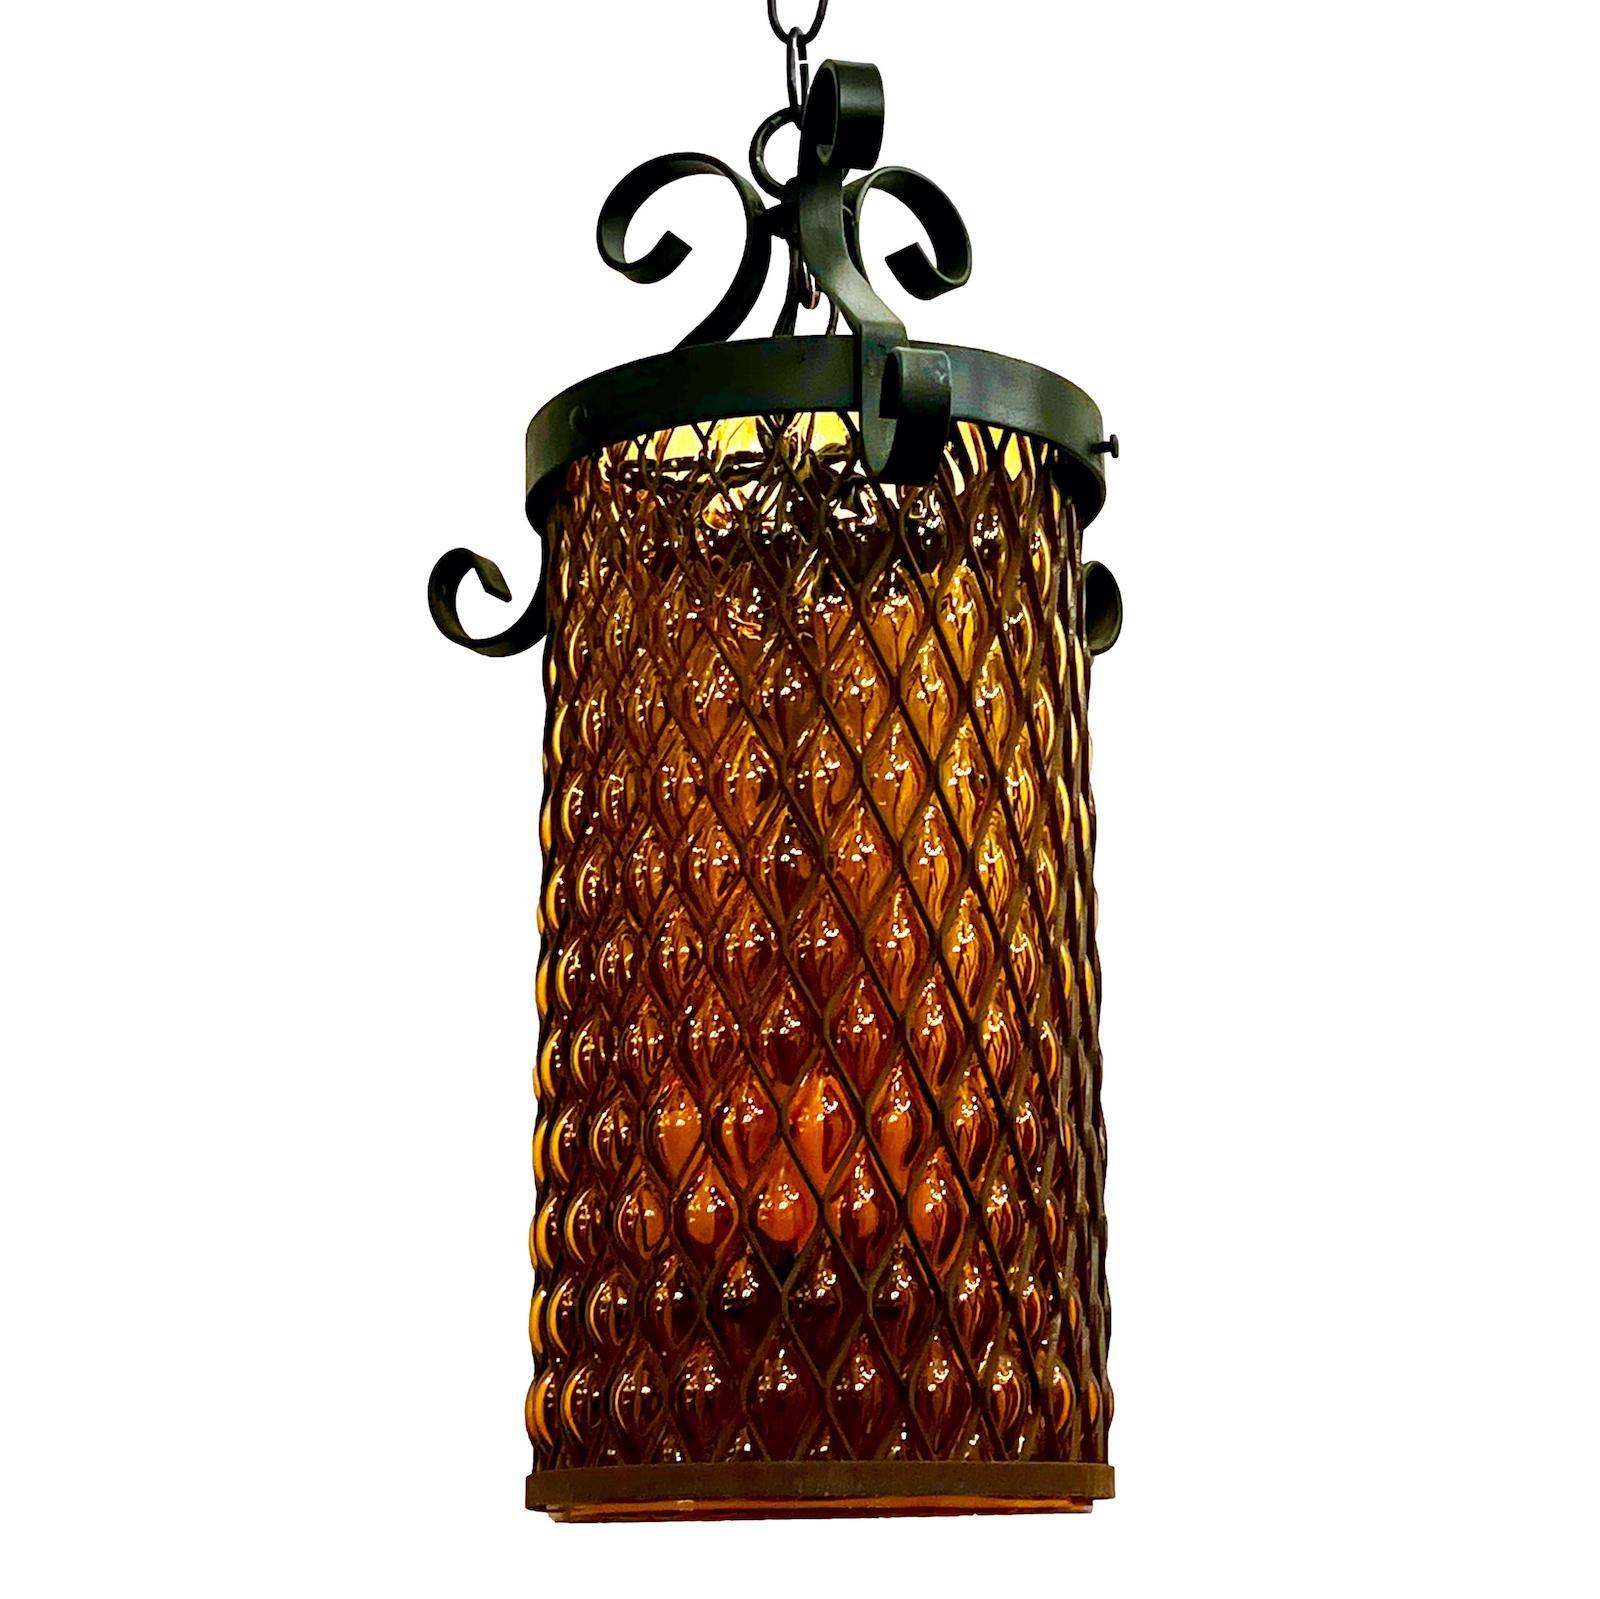 Pair of circa 1950s Italian blown glass lantern with three interior lights each. Sold individually.

Measurements:
Current drop: 26.5